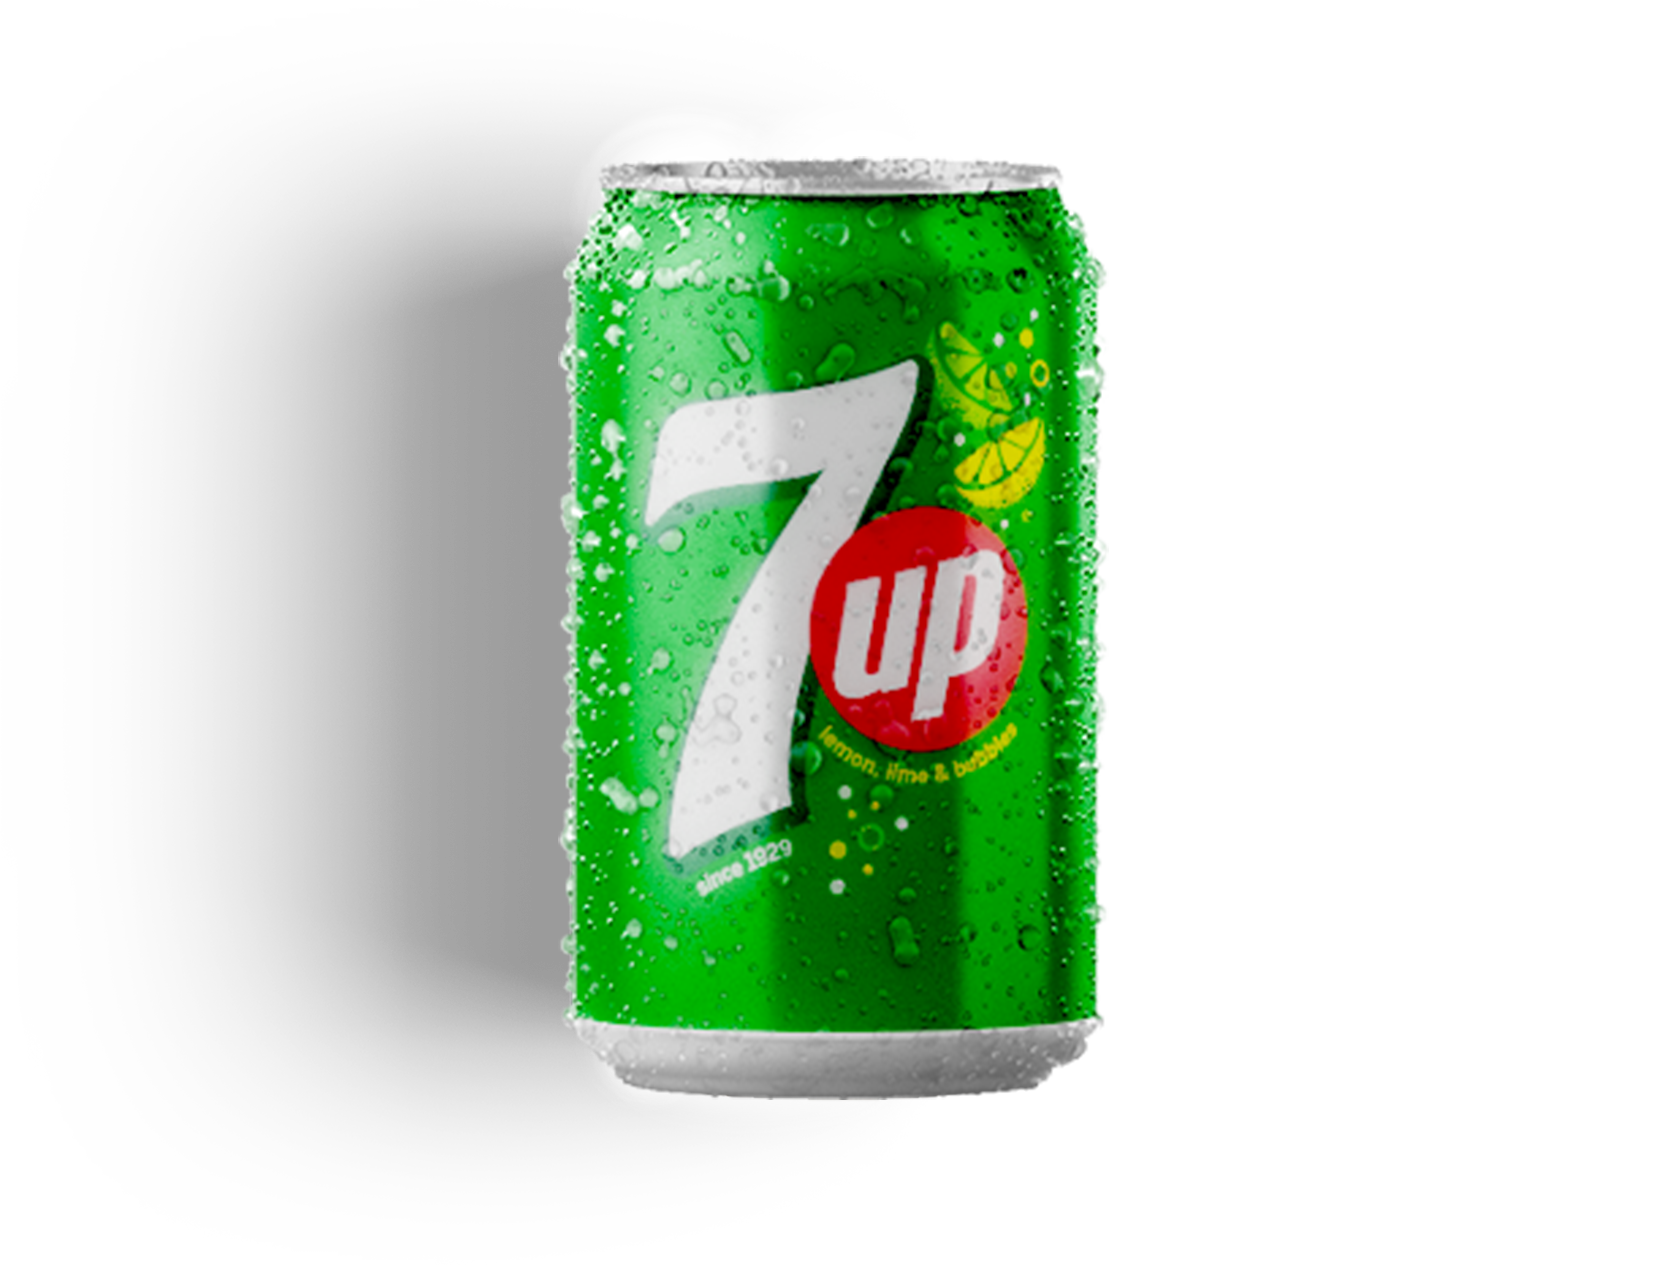 7up.